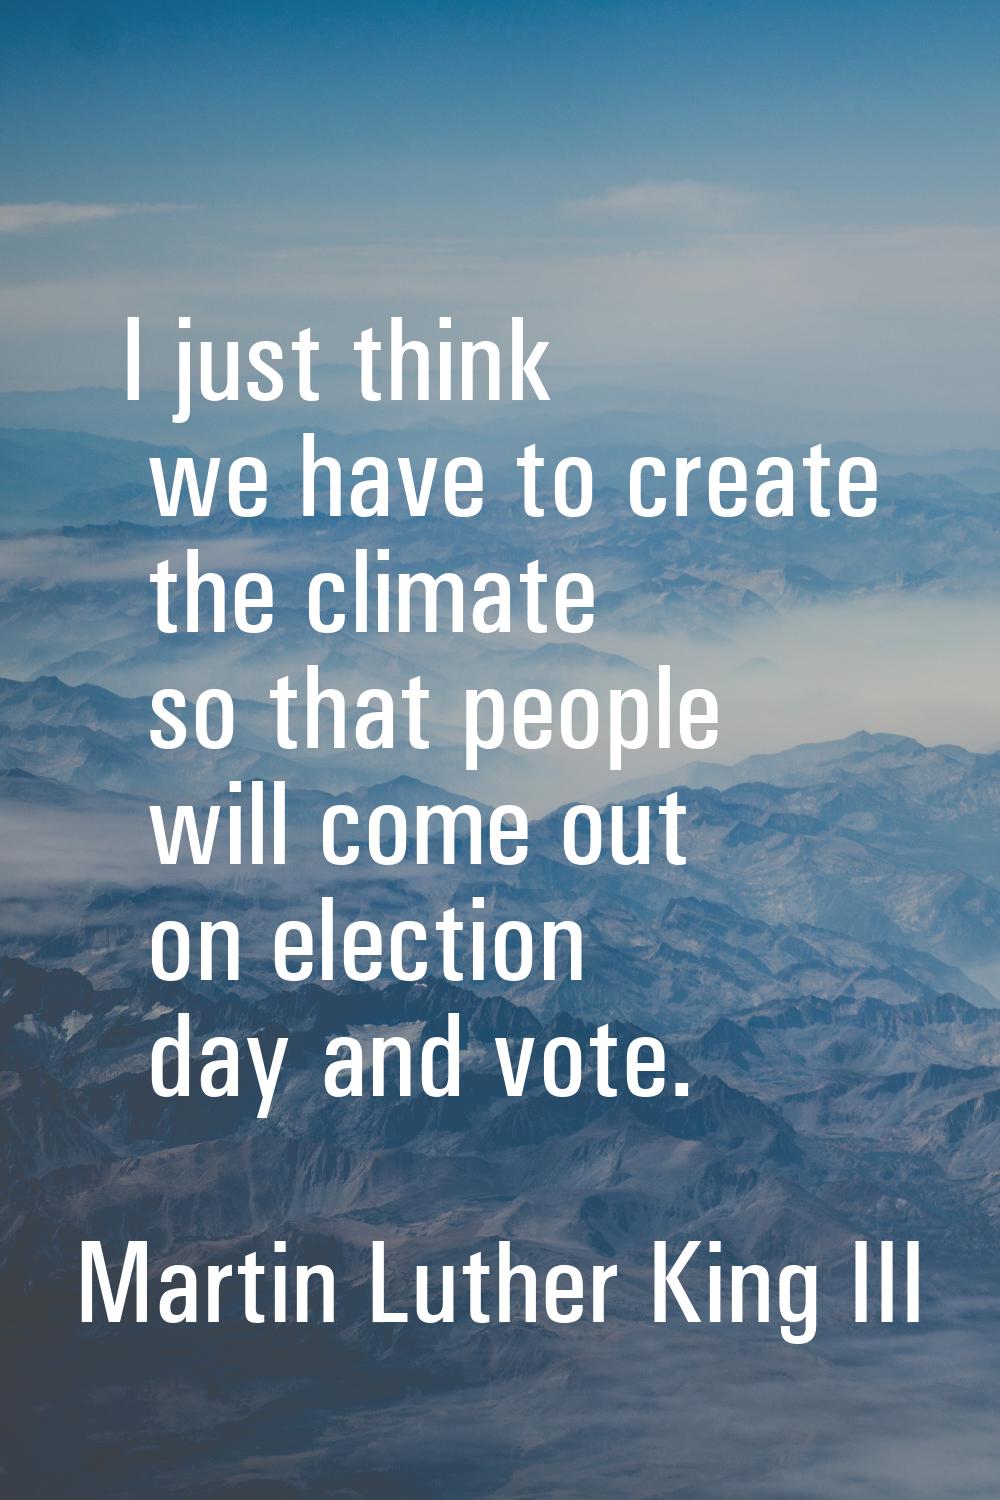 I just think we have to create the climate so that people will come out on election day and vote.